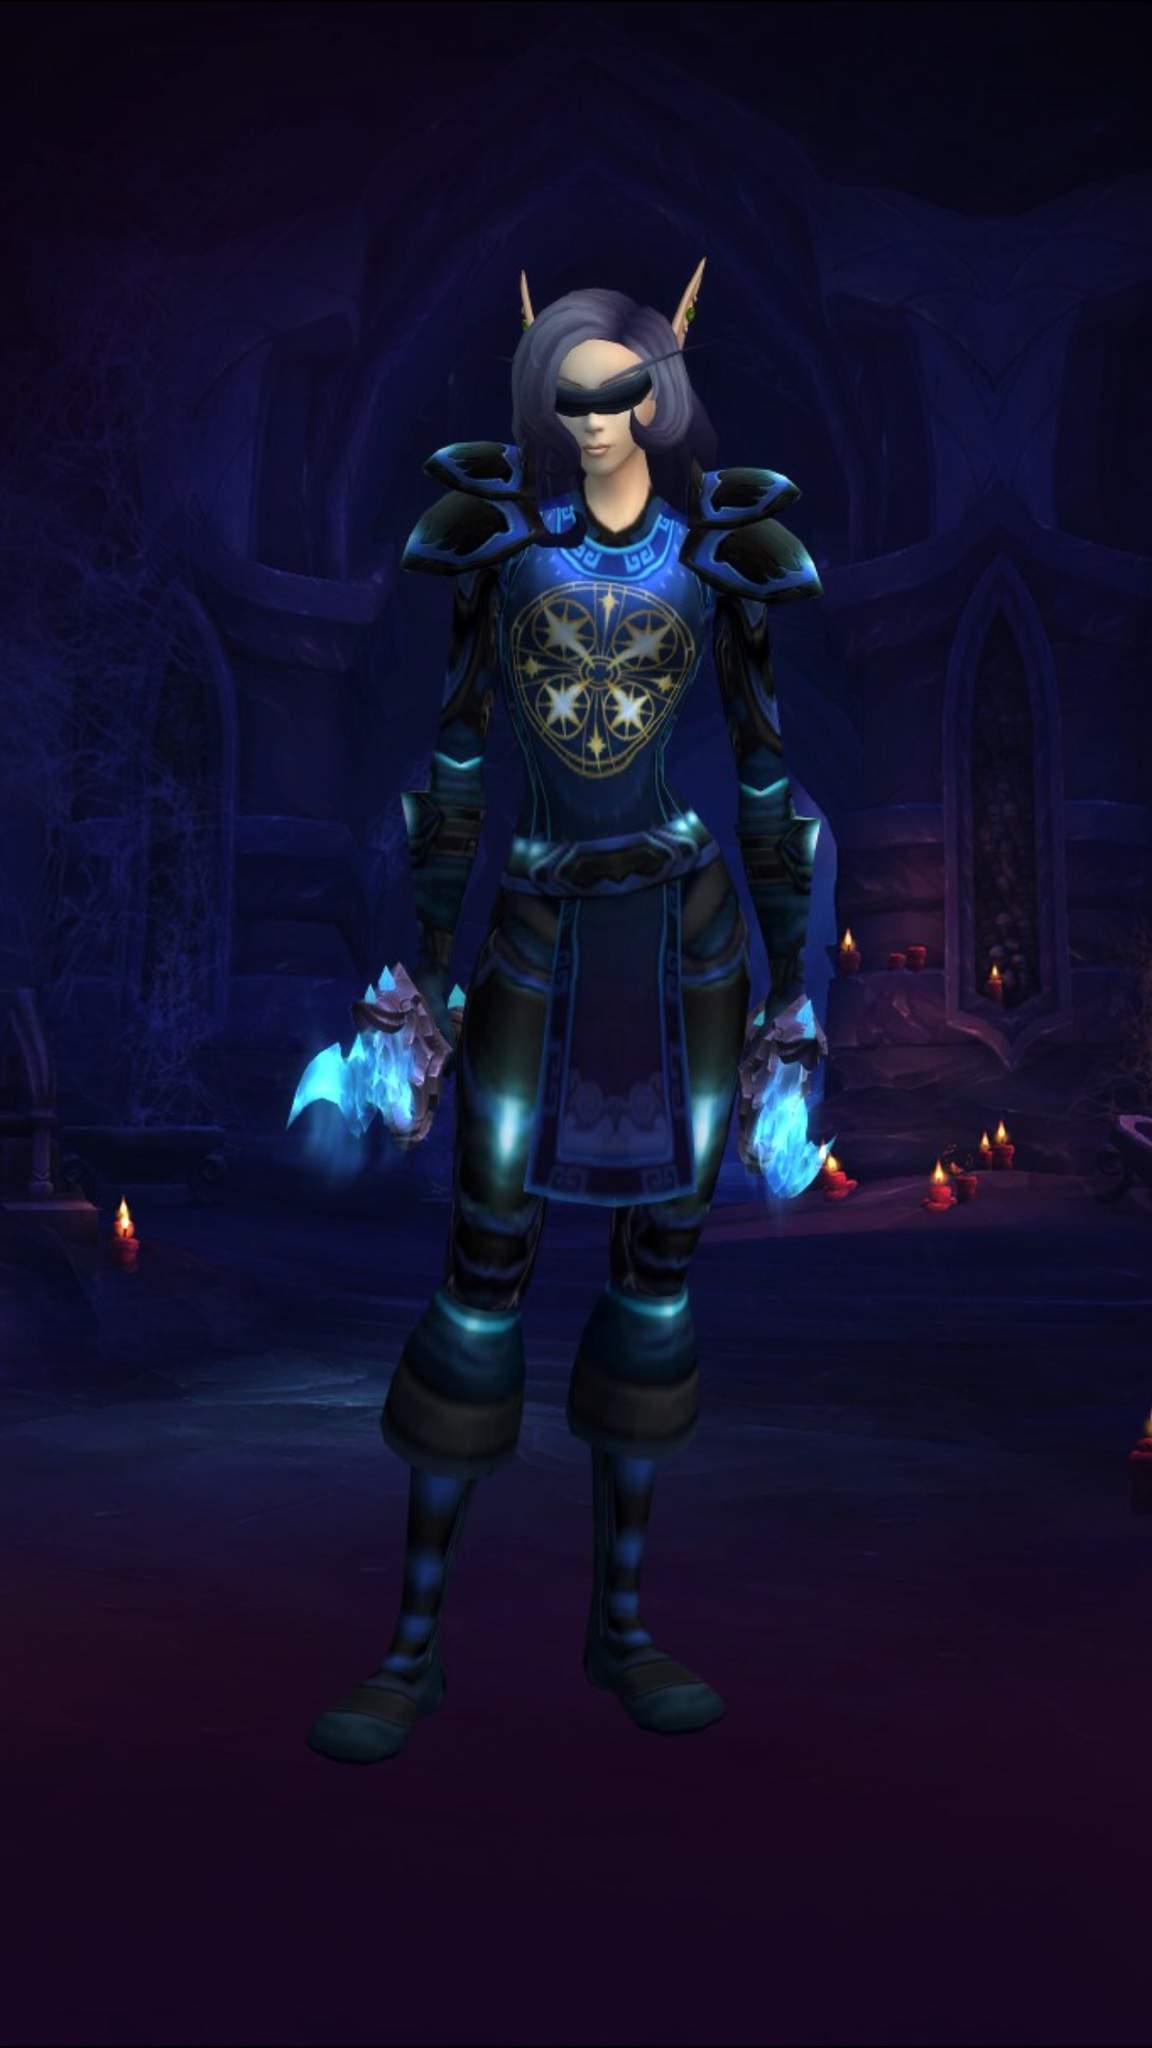 mage tower assassination rogue